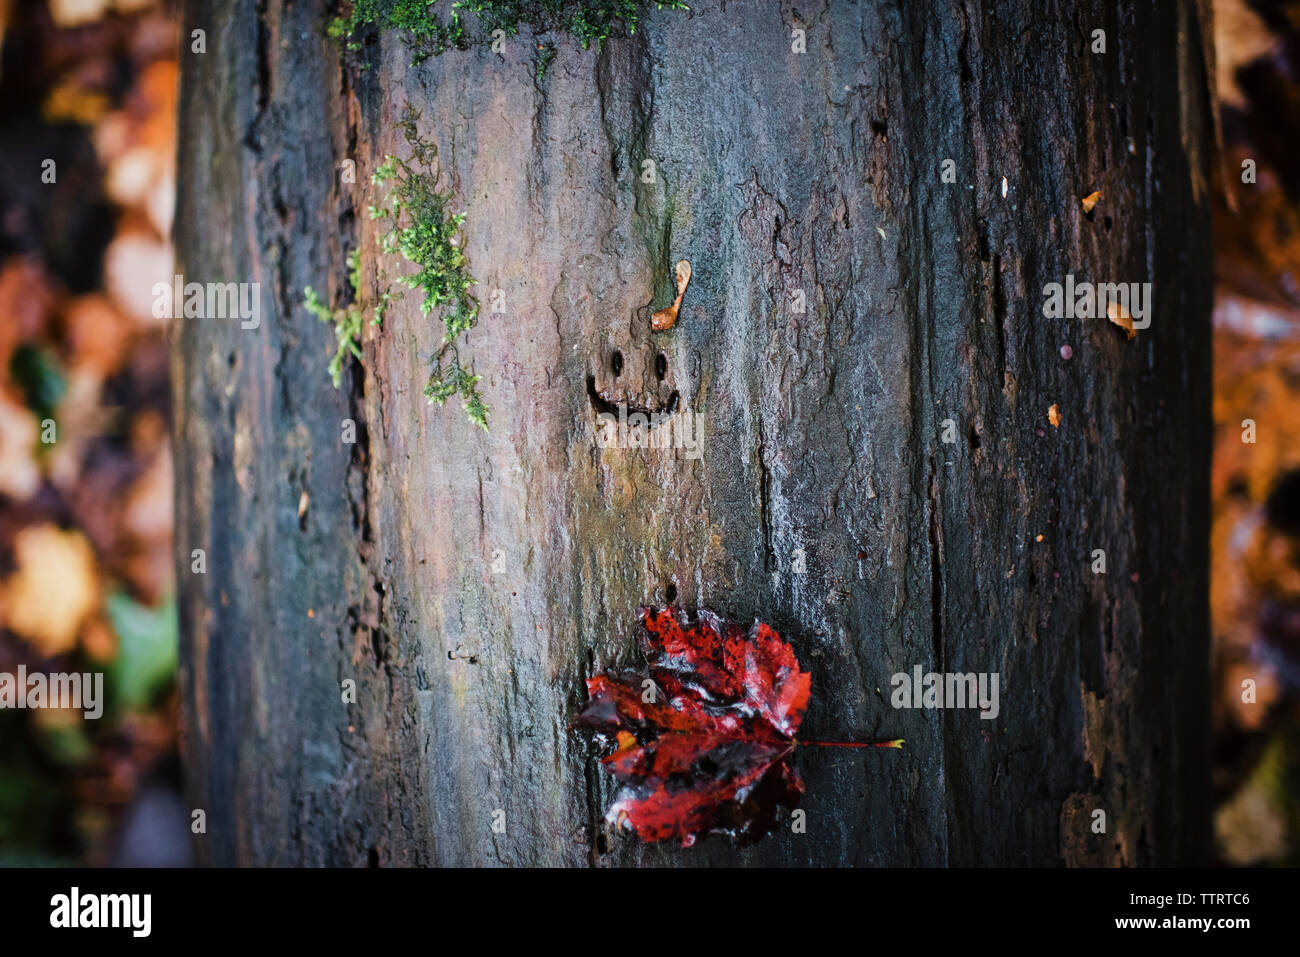 Close-up of smiley face carved on wet tree trunk Stock Photo